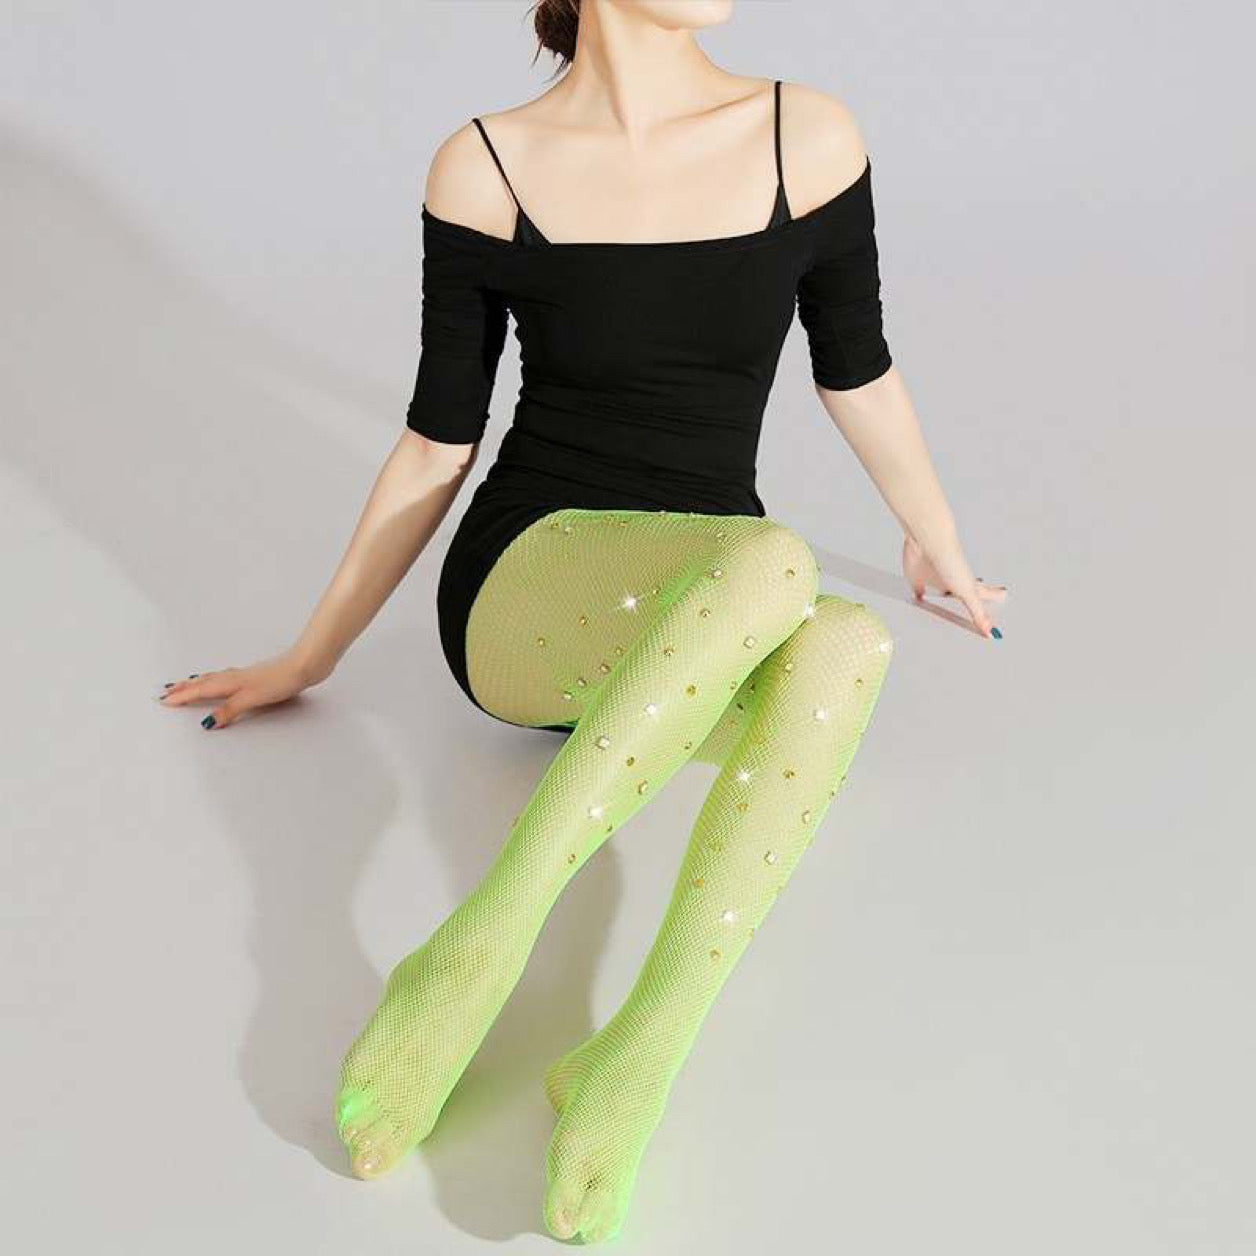 Large pearl & gold stones Fishnet Stockings - Lime Green Neon – Dropashoe